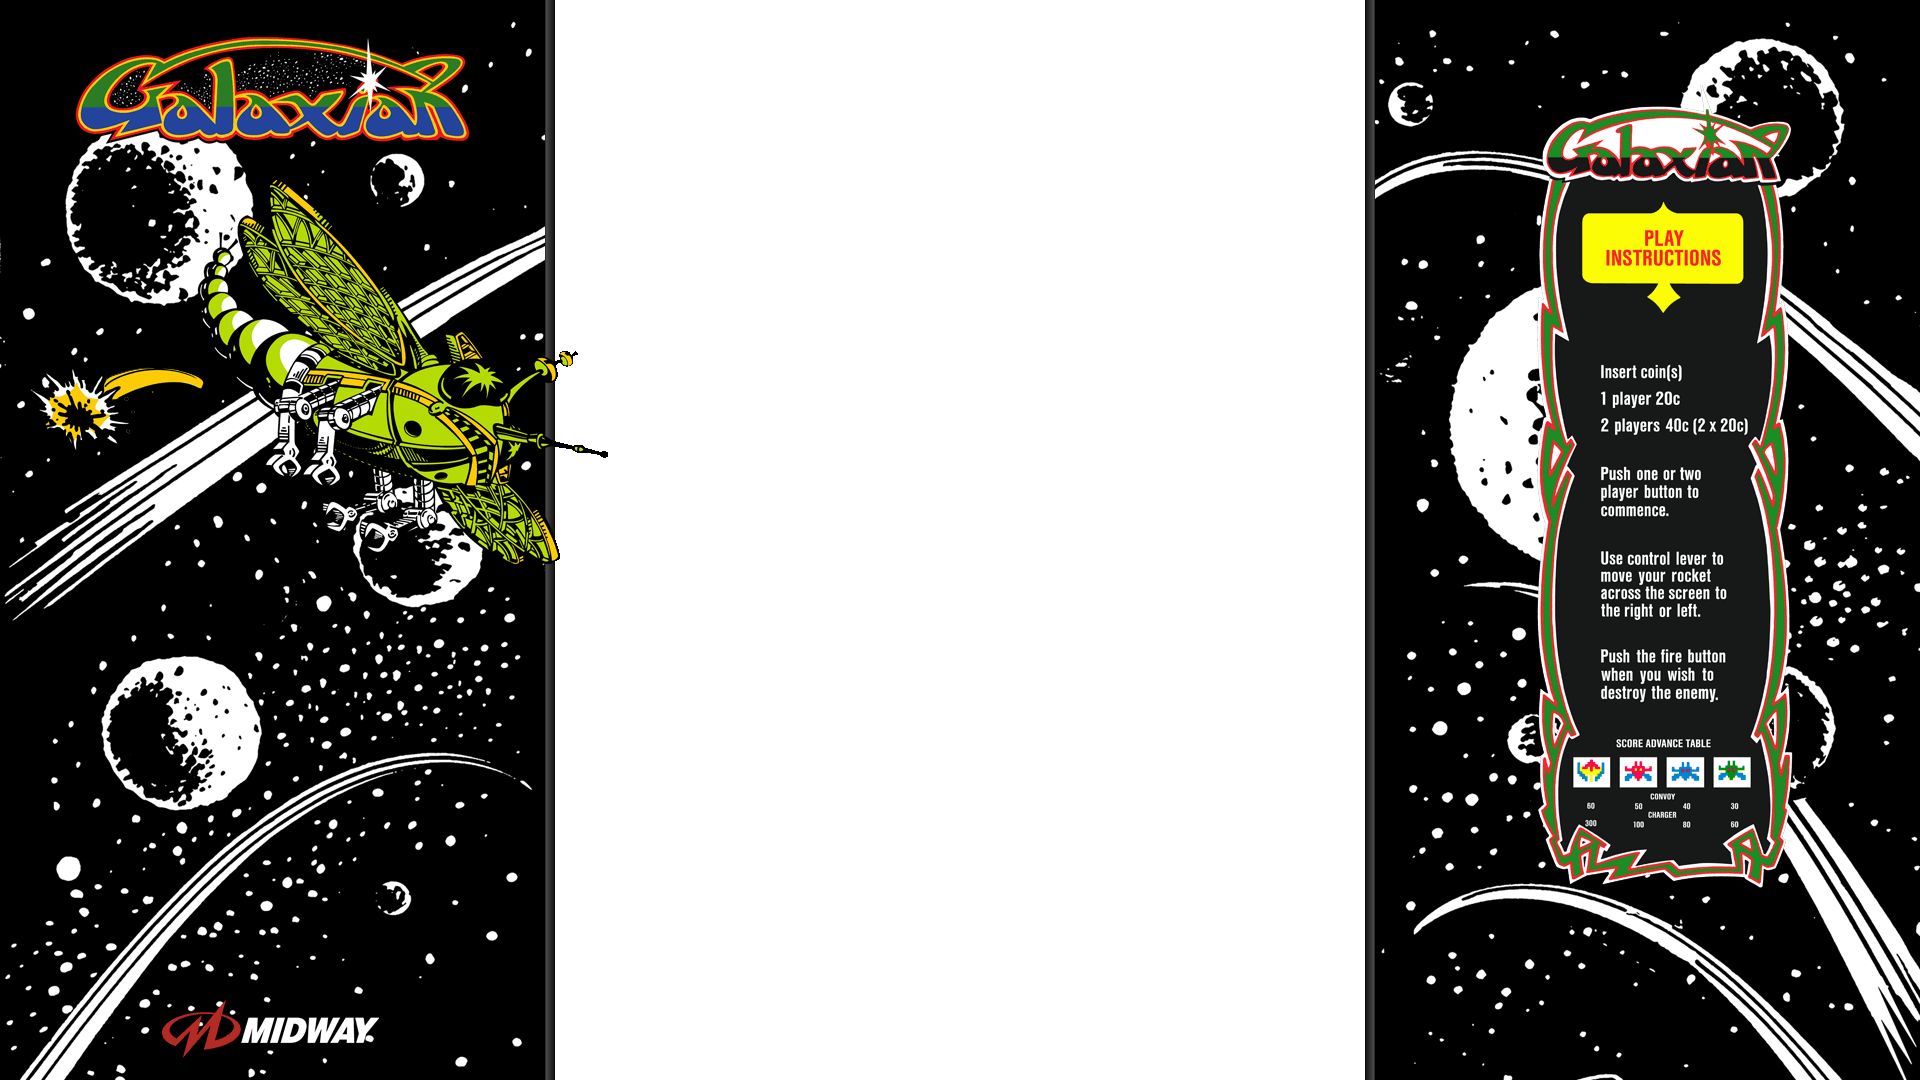 Galaxian (Midway) 1080p overlay